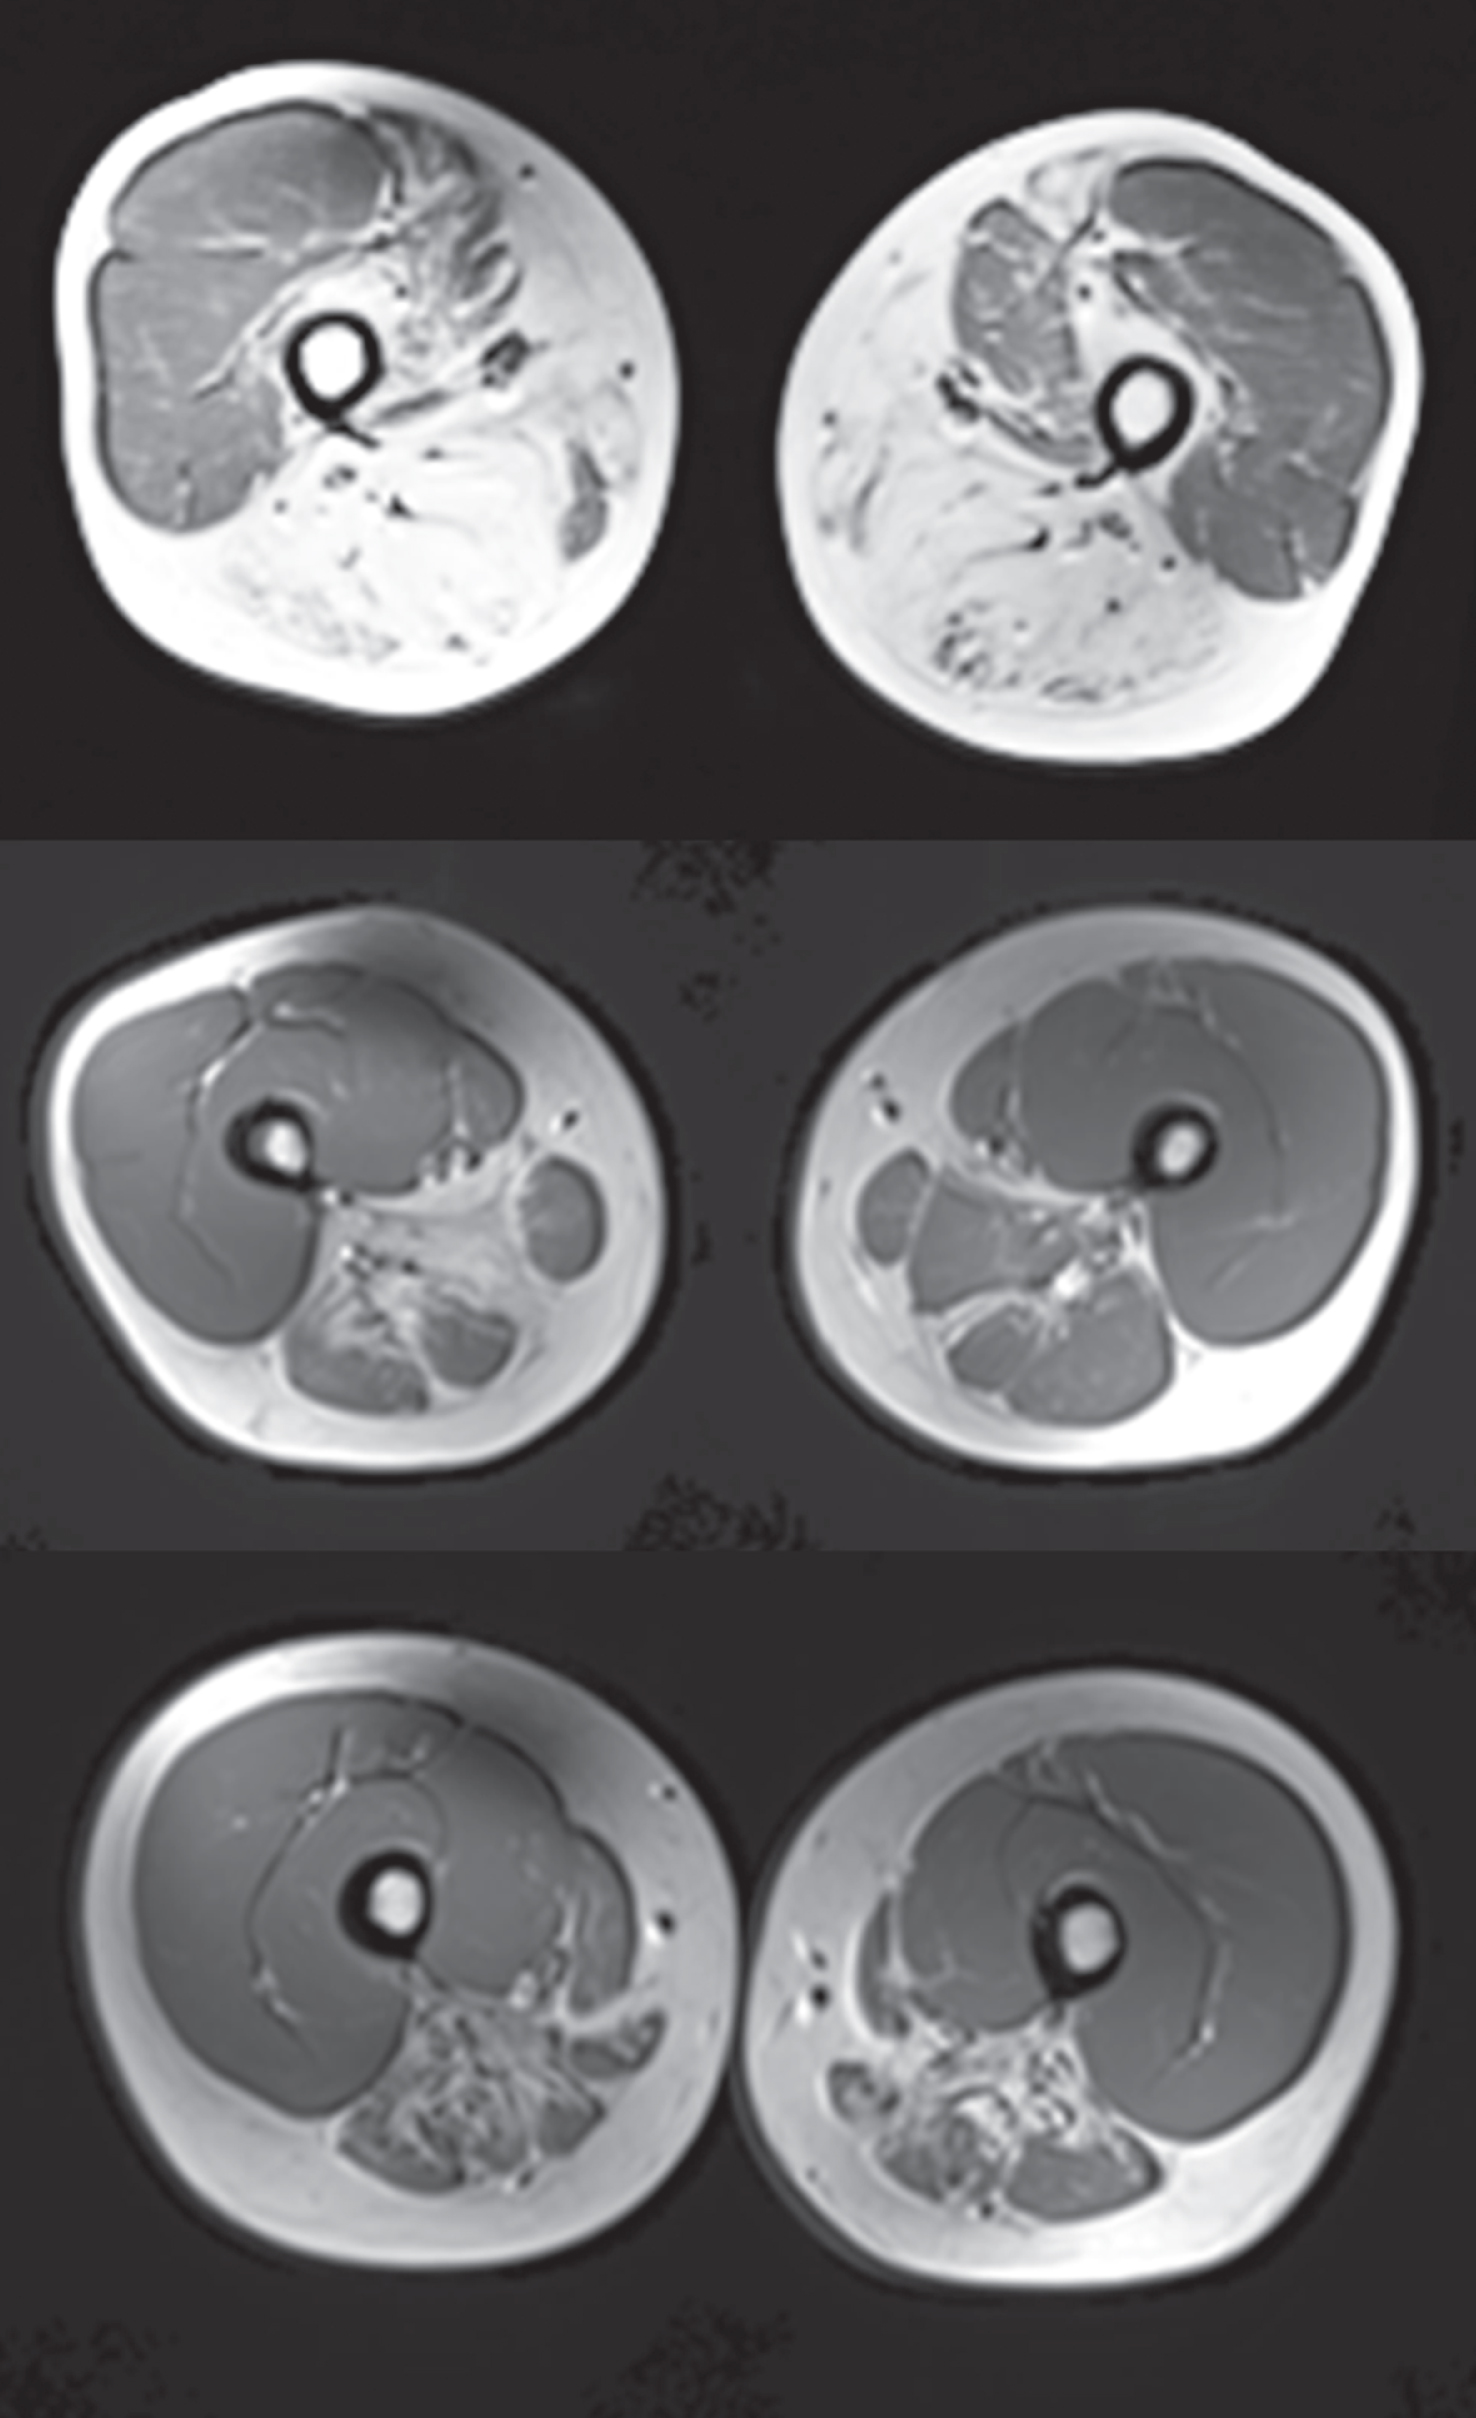 MRI (T1 weighted) Scans of Example Subject Lower Extremities Cross-sectional T1 weighted MRI scans of muscle groups of the upper leg of 3 selected GNEM subjects. The top panel shows the severity and specificity of destruction in the posterior compartment of the thigh compared with the quadriceps and had a score of 5. The two lower panels show substantial disease with scores in the 3 range. The mean scores for the key muscles in this posterior part of the thigh ranged from 3.8 to 4.1 for the overall population.